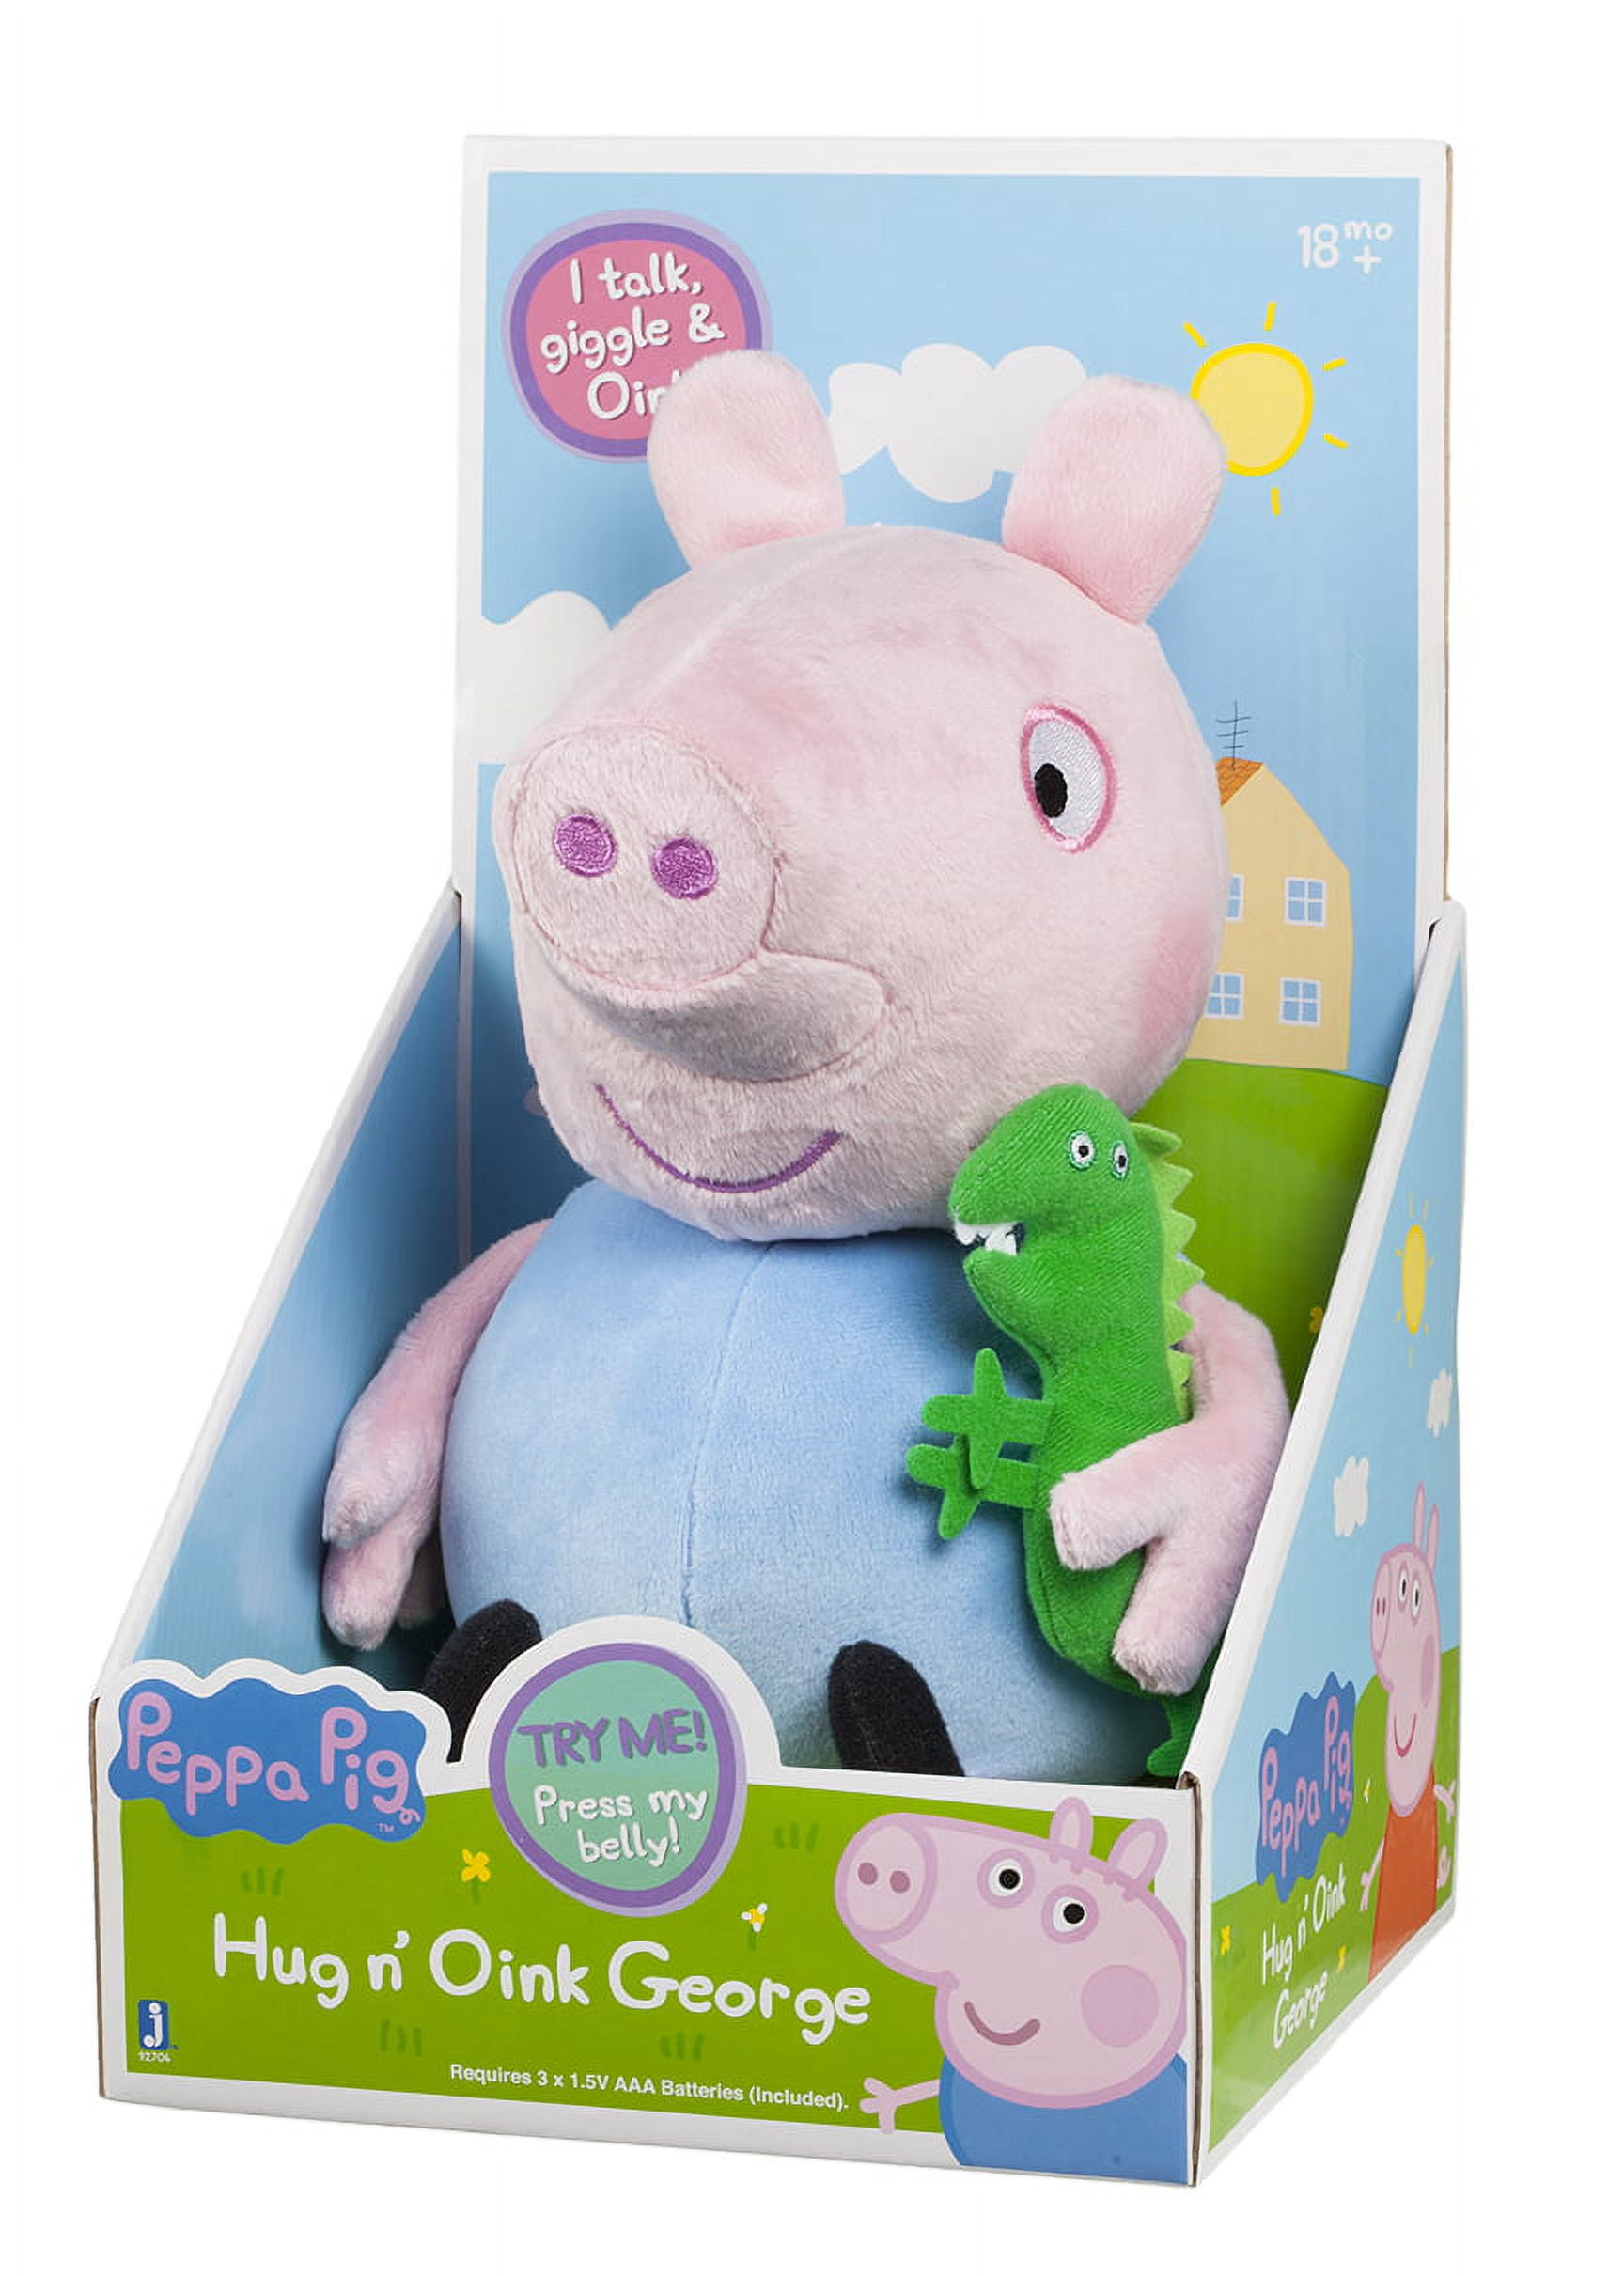 Peppa Pig Hug N' Oink Plush Stuffed Animal Toy, Large 12 - Press Peppa's  Belly to Hear Her Talk, Giggle & Oink - Ages 18+ Months